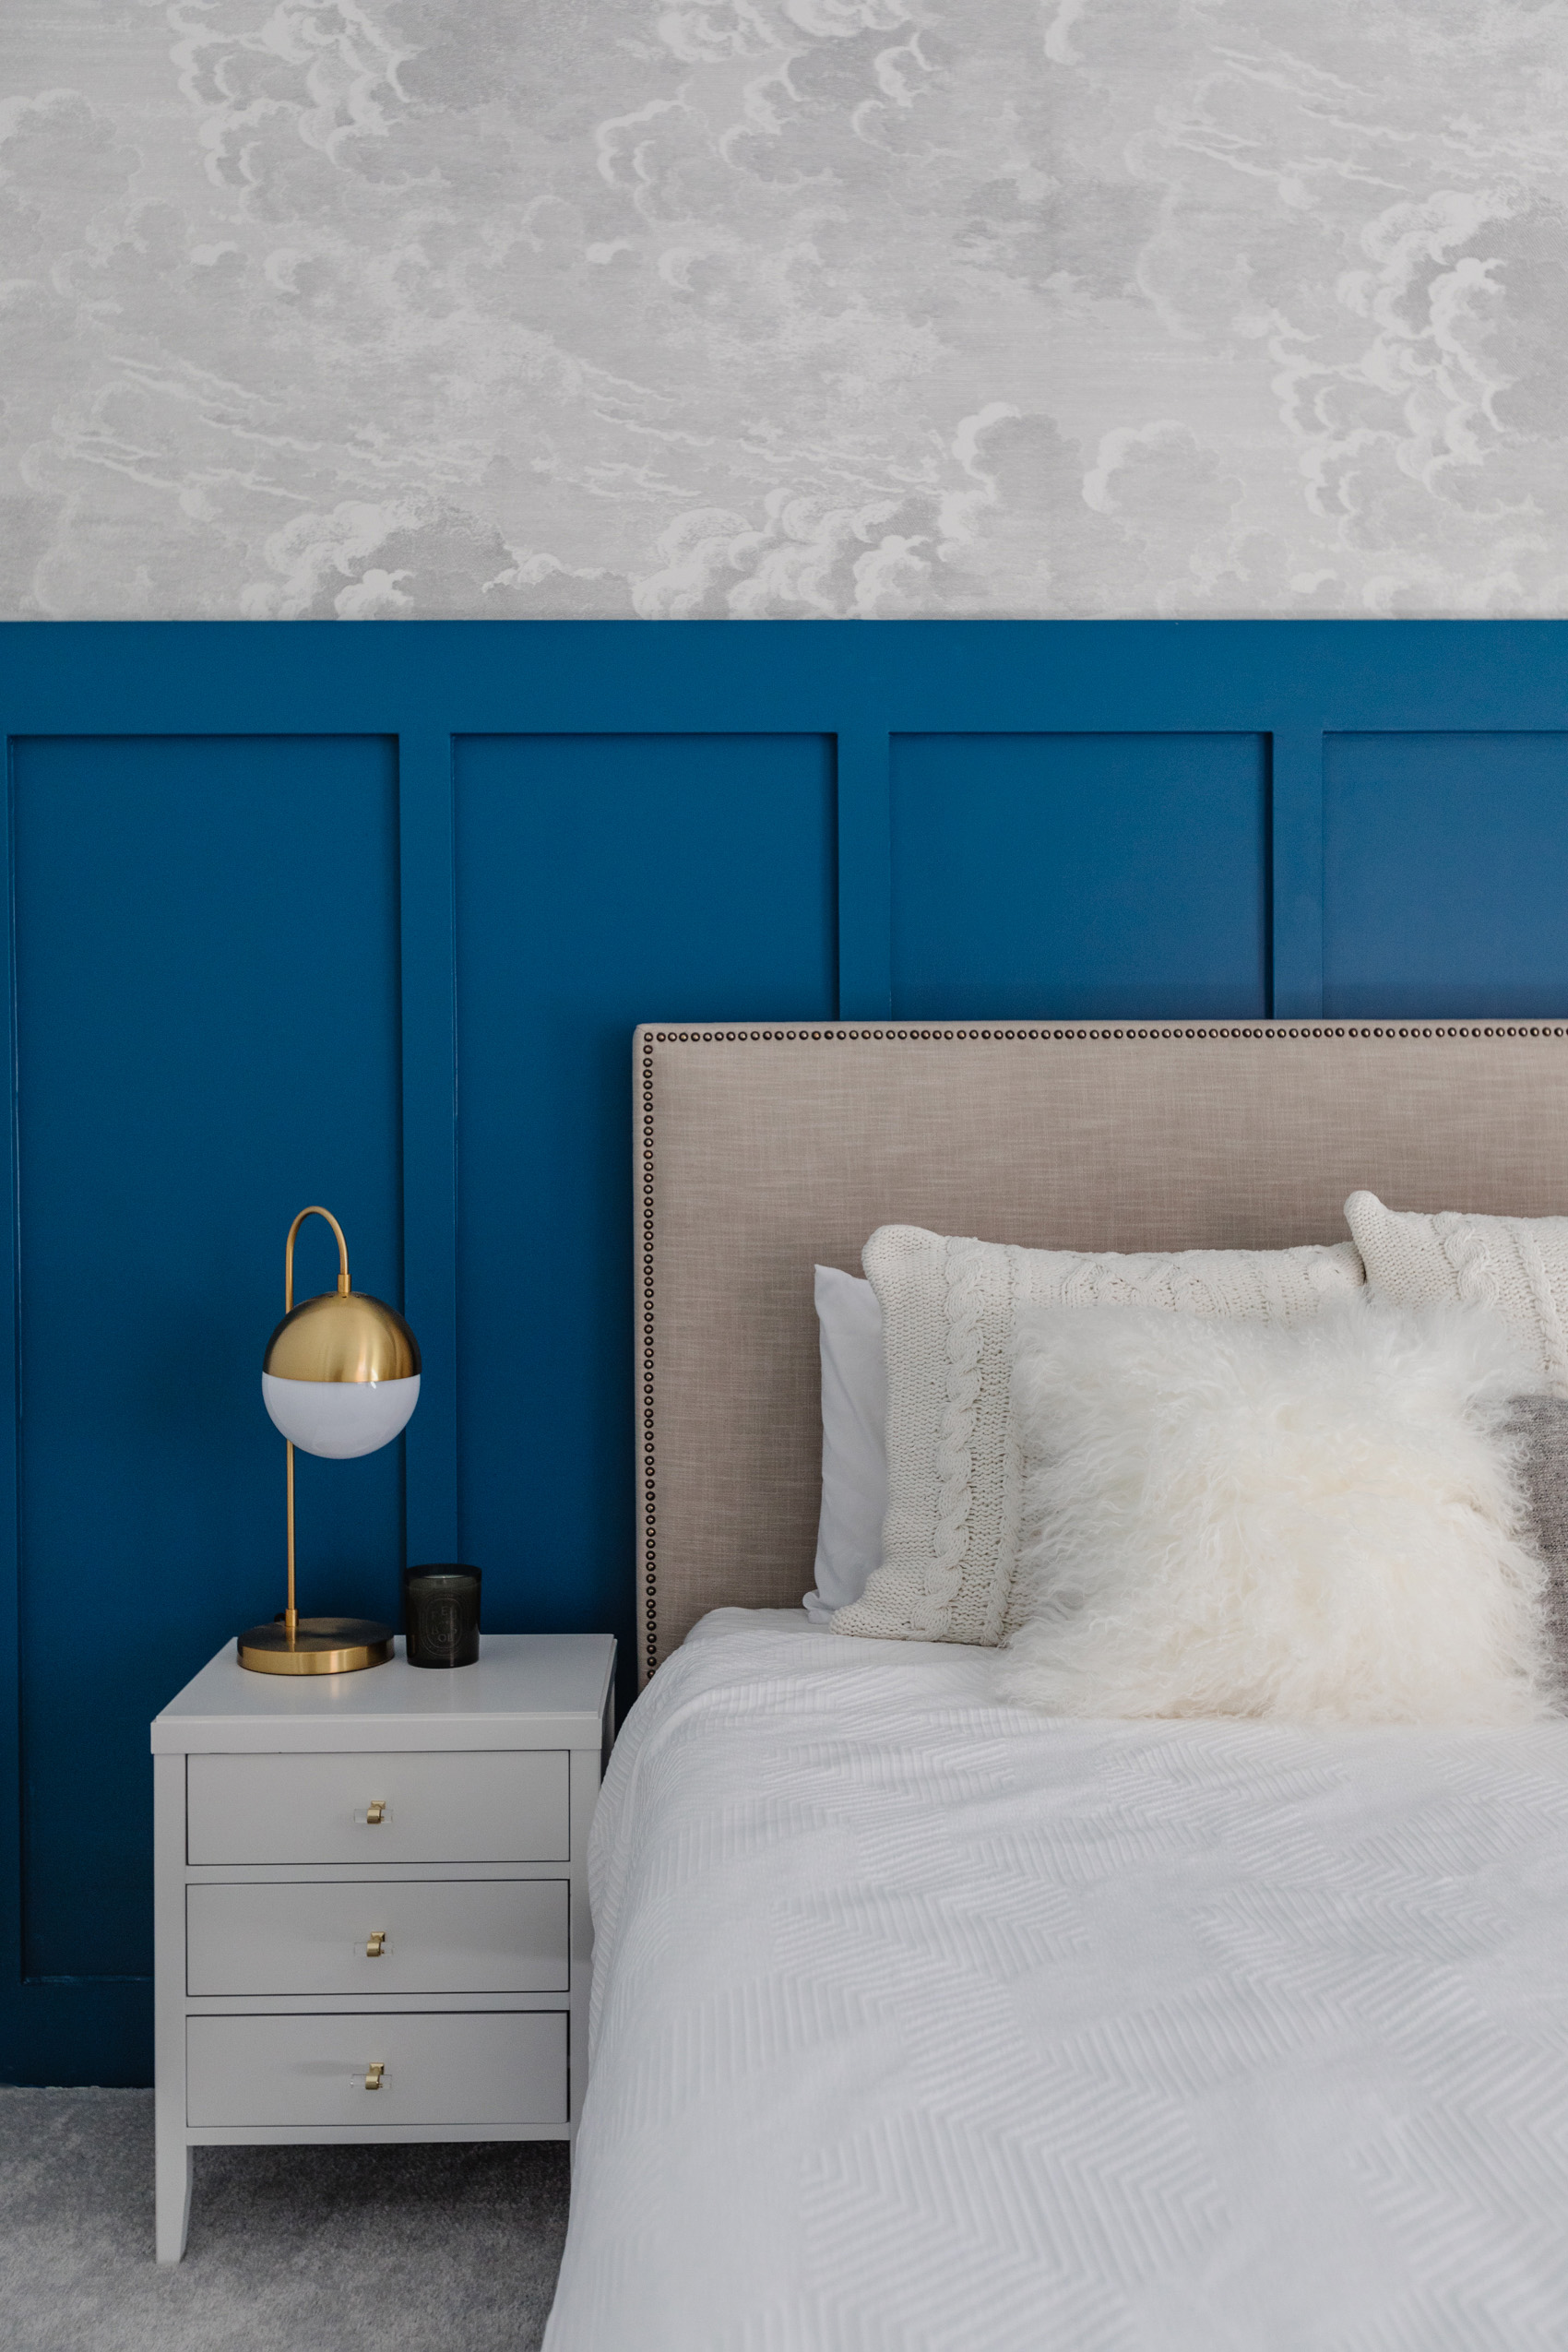 Chinese Porcelain board and batten wall with cloud wallpaper, west elm nailhead upholstered headboard, white nightstands, diptyque candle and white bedding